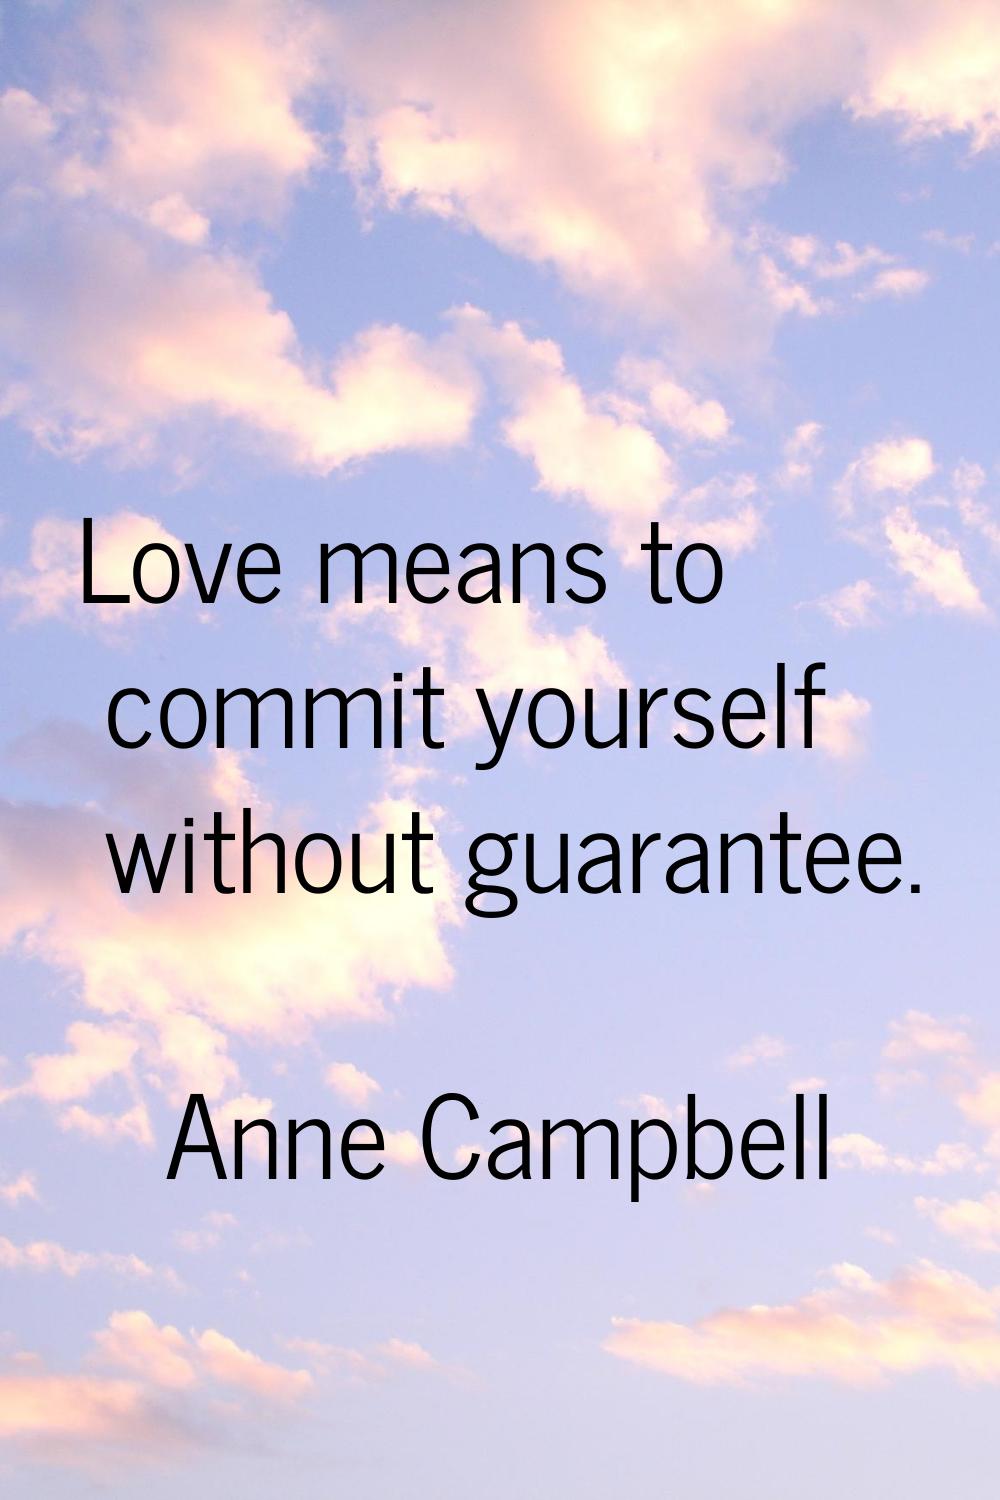 Love means to commit yourself without guarantee.